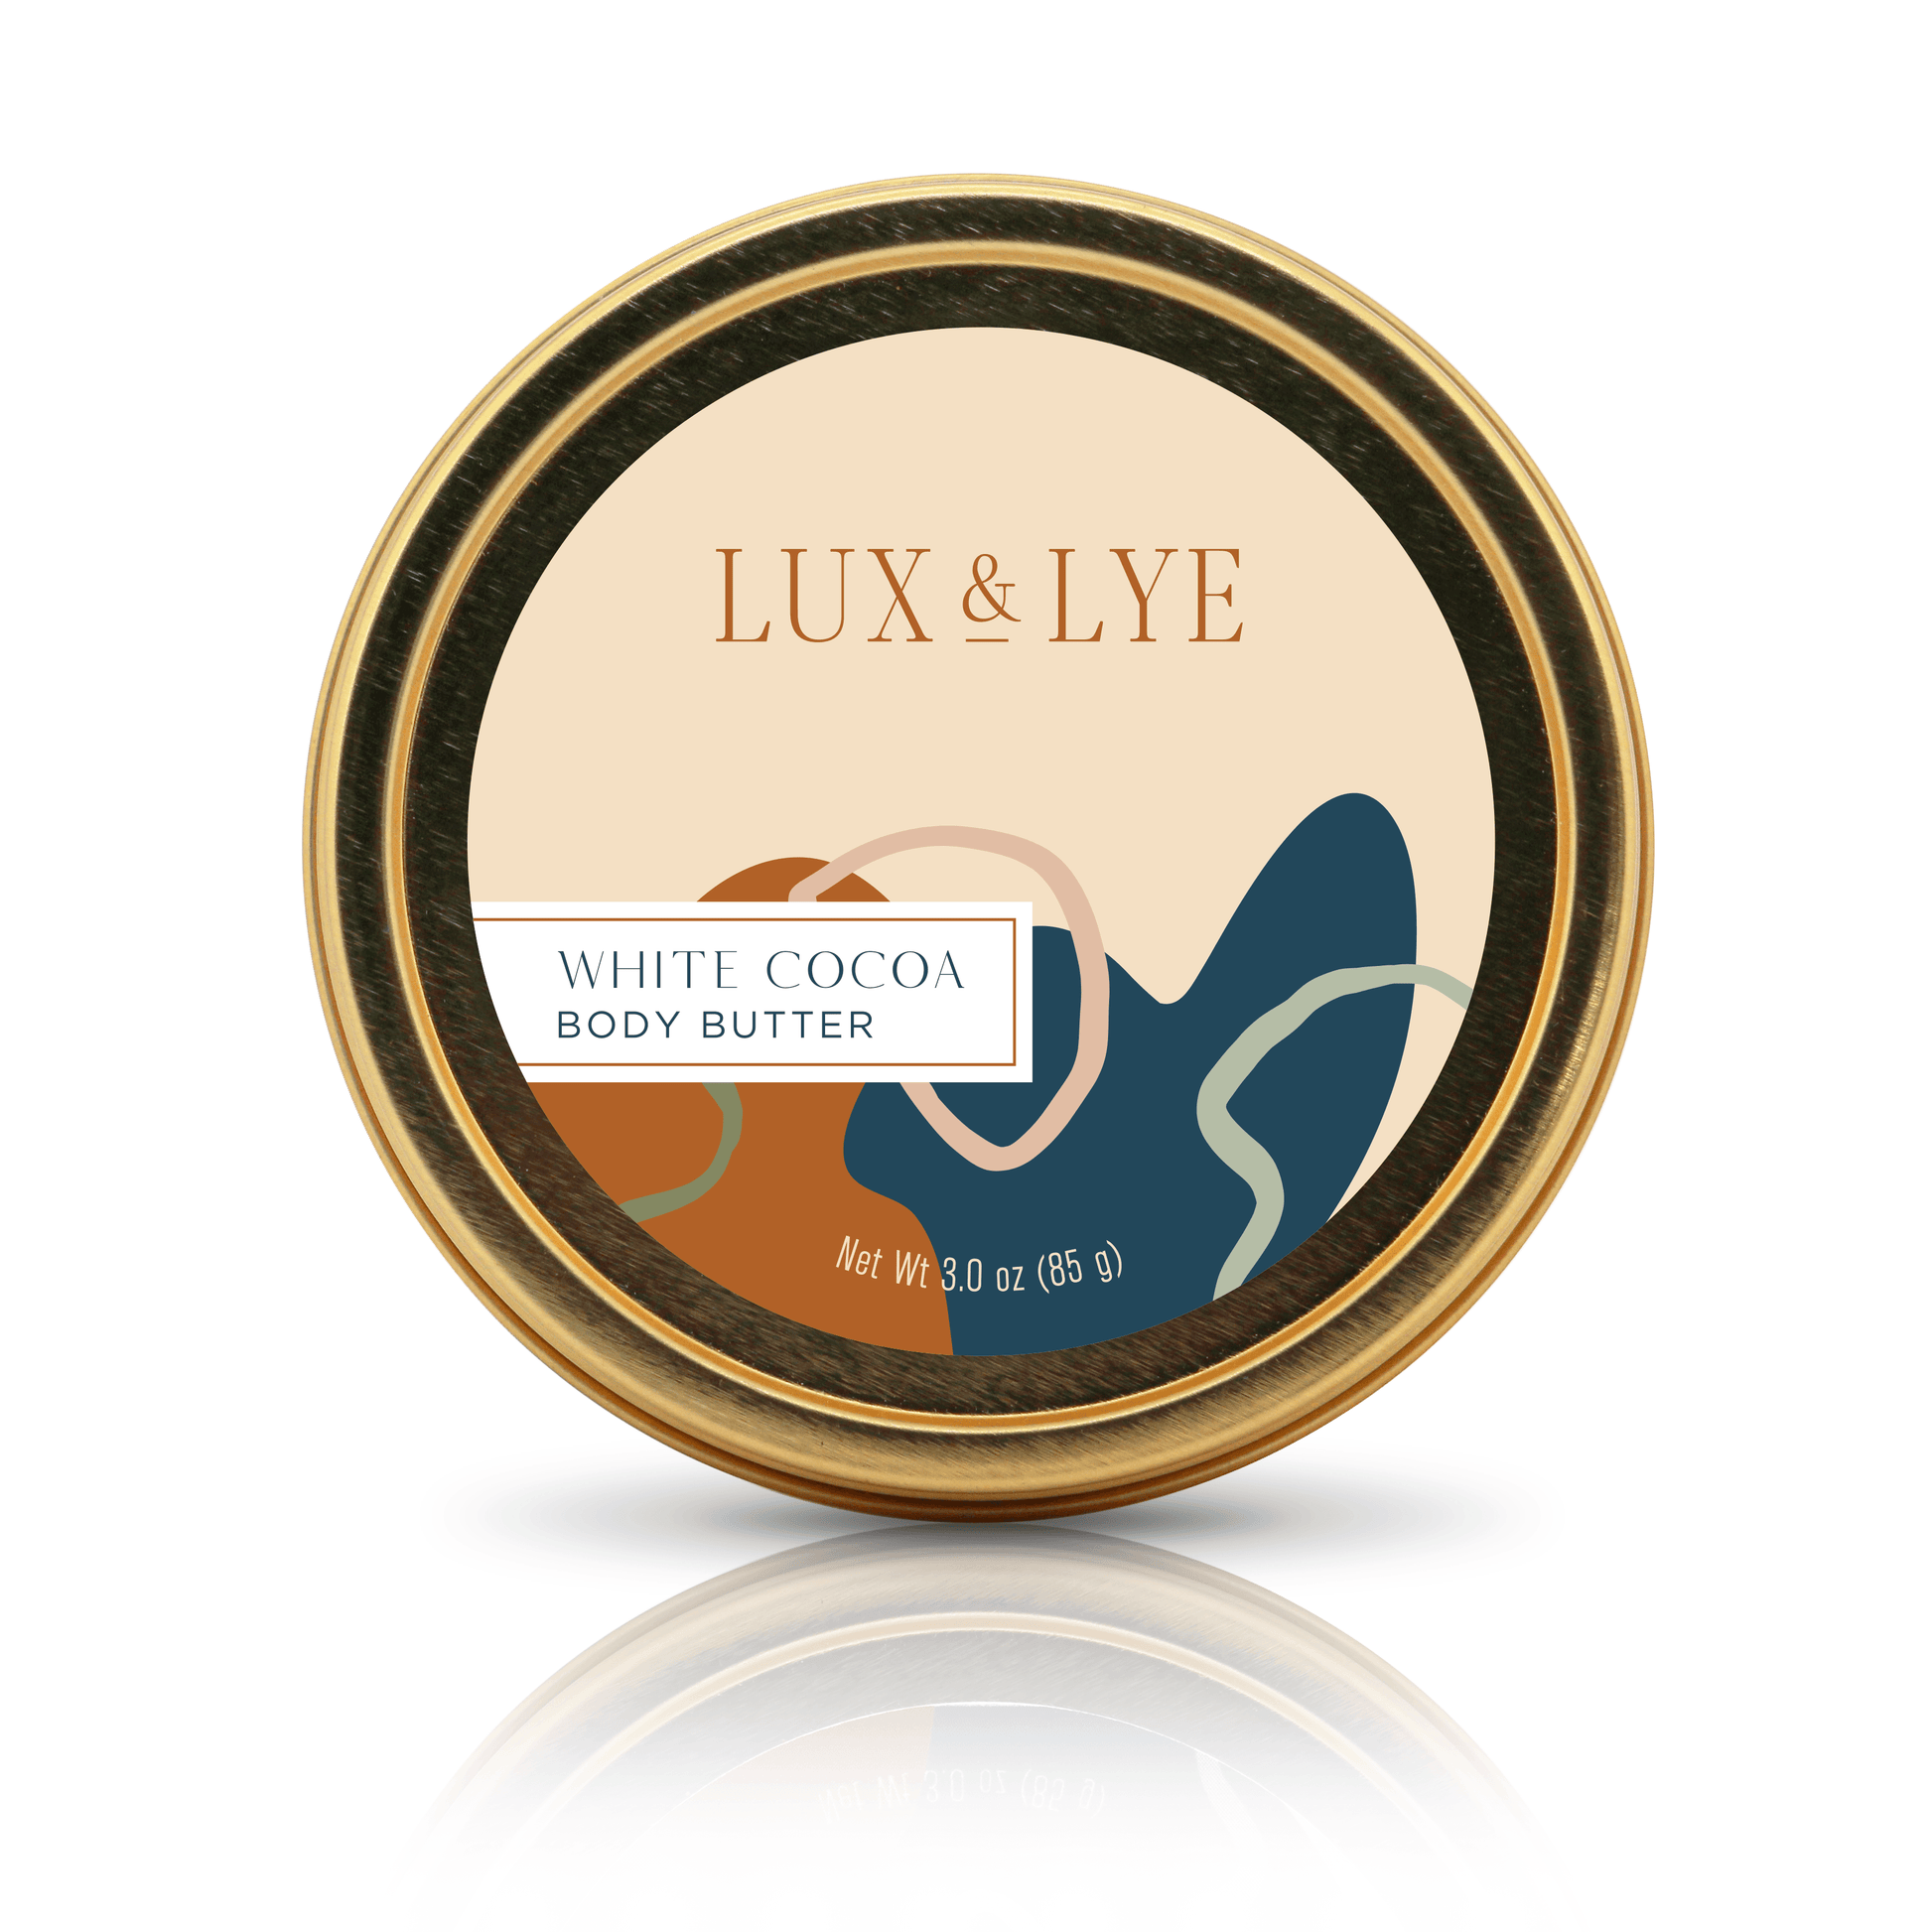 White Cocoa Body Butter - Lux and Lye